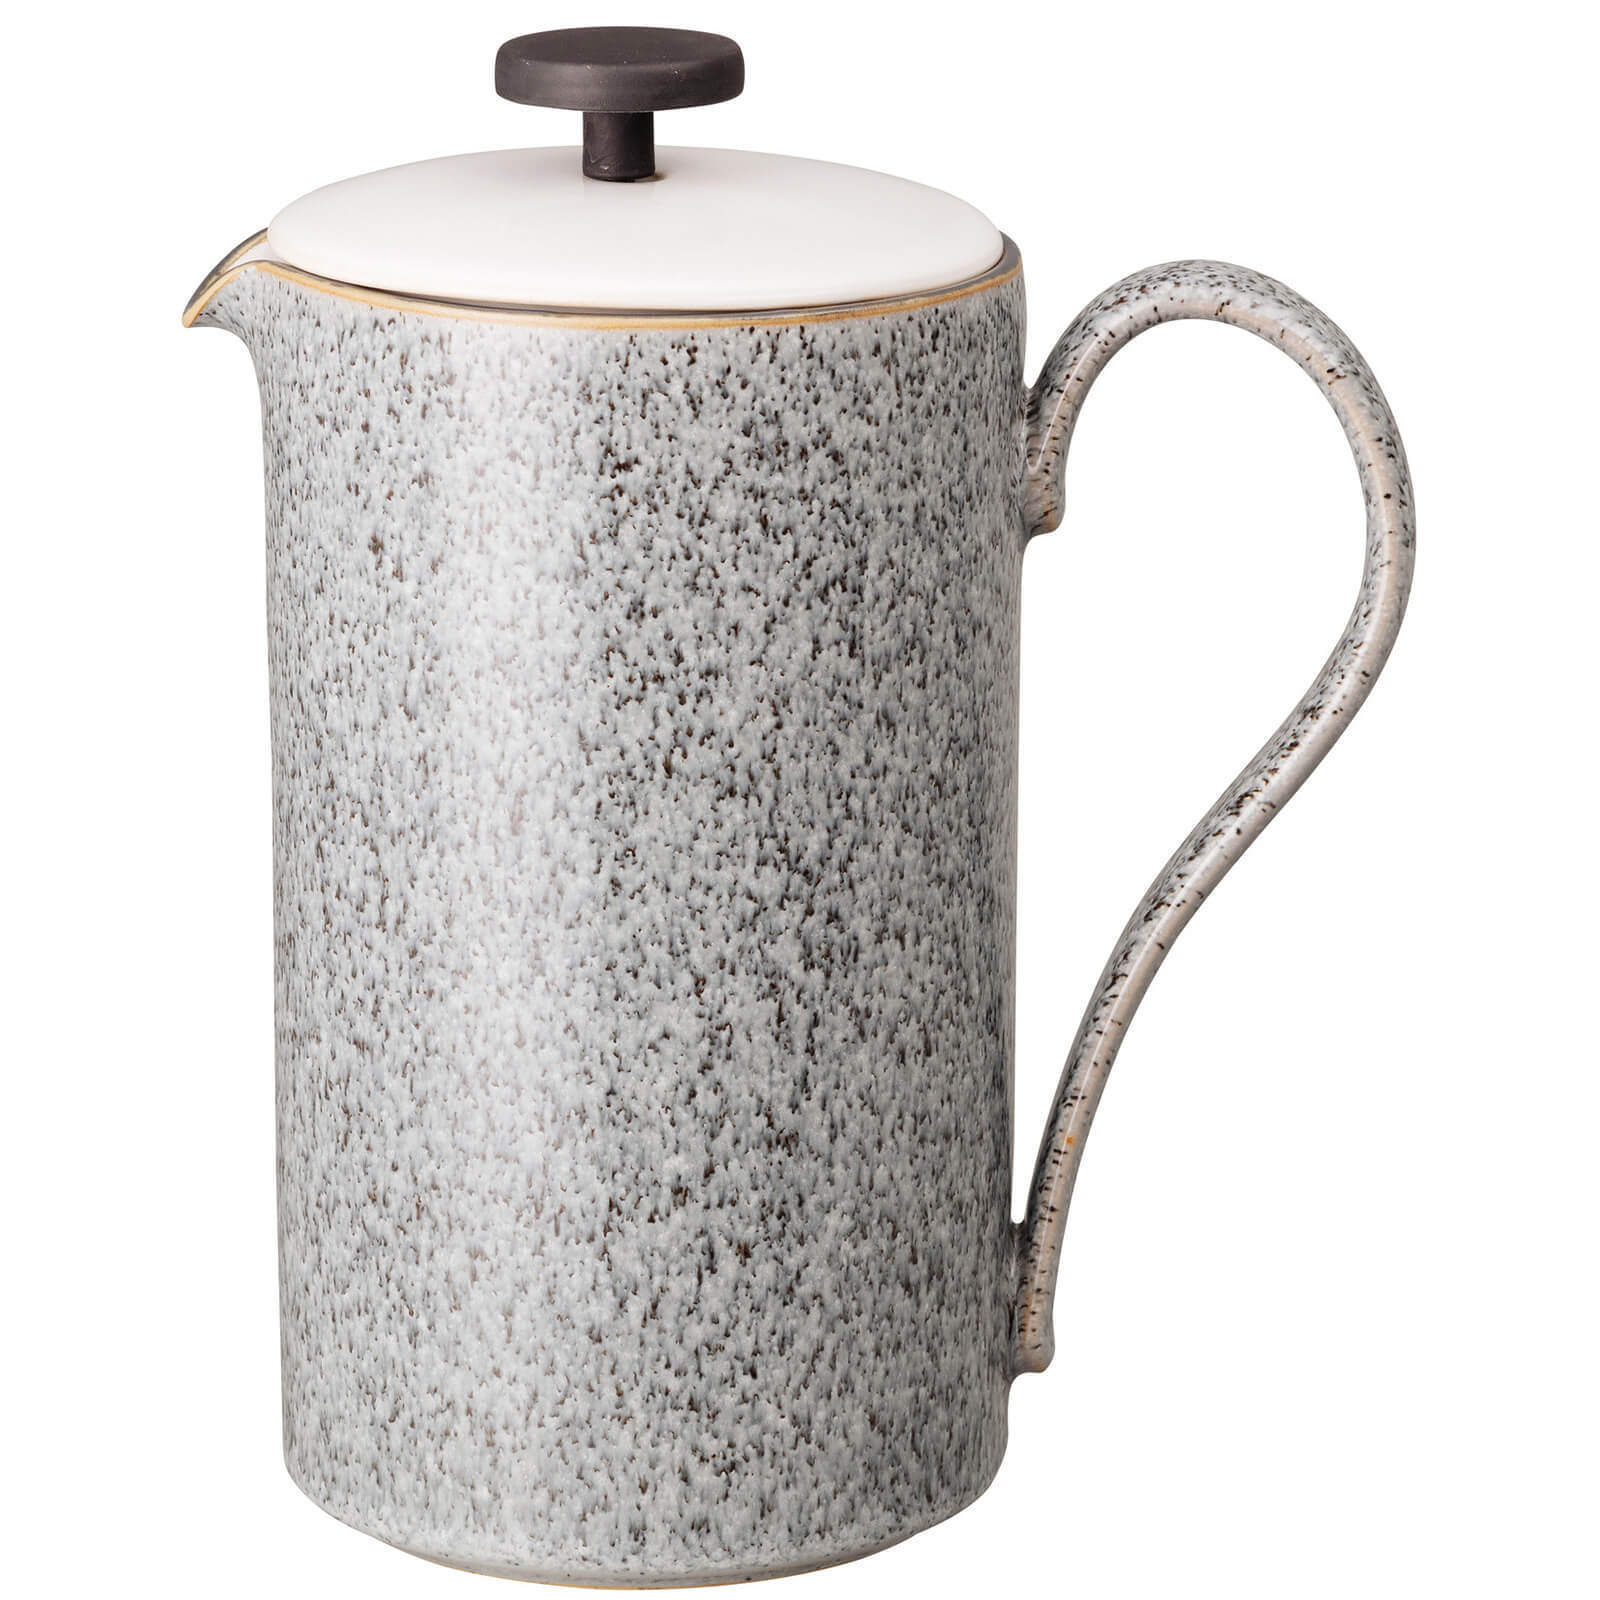 Photos - Other tableware Denby Studio Grey Brew Cafetiere 426042658 